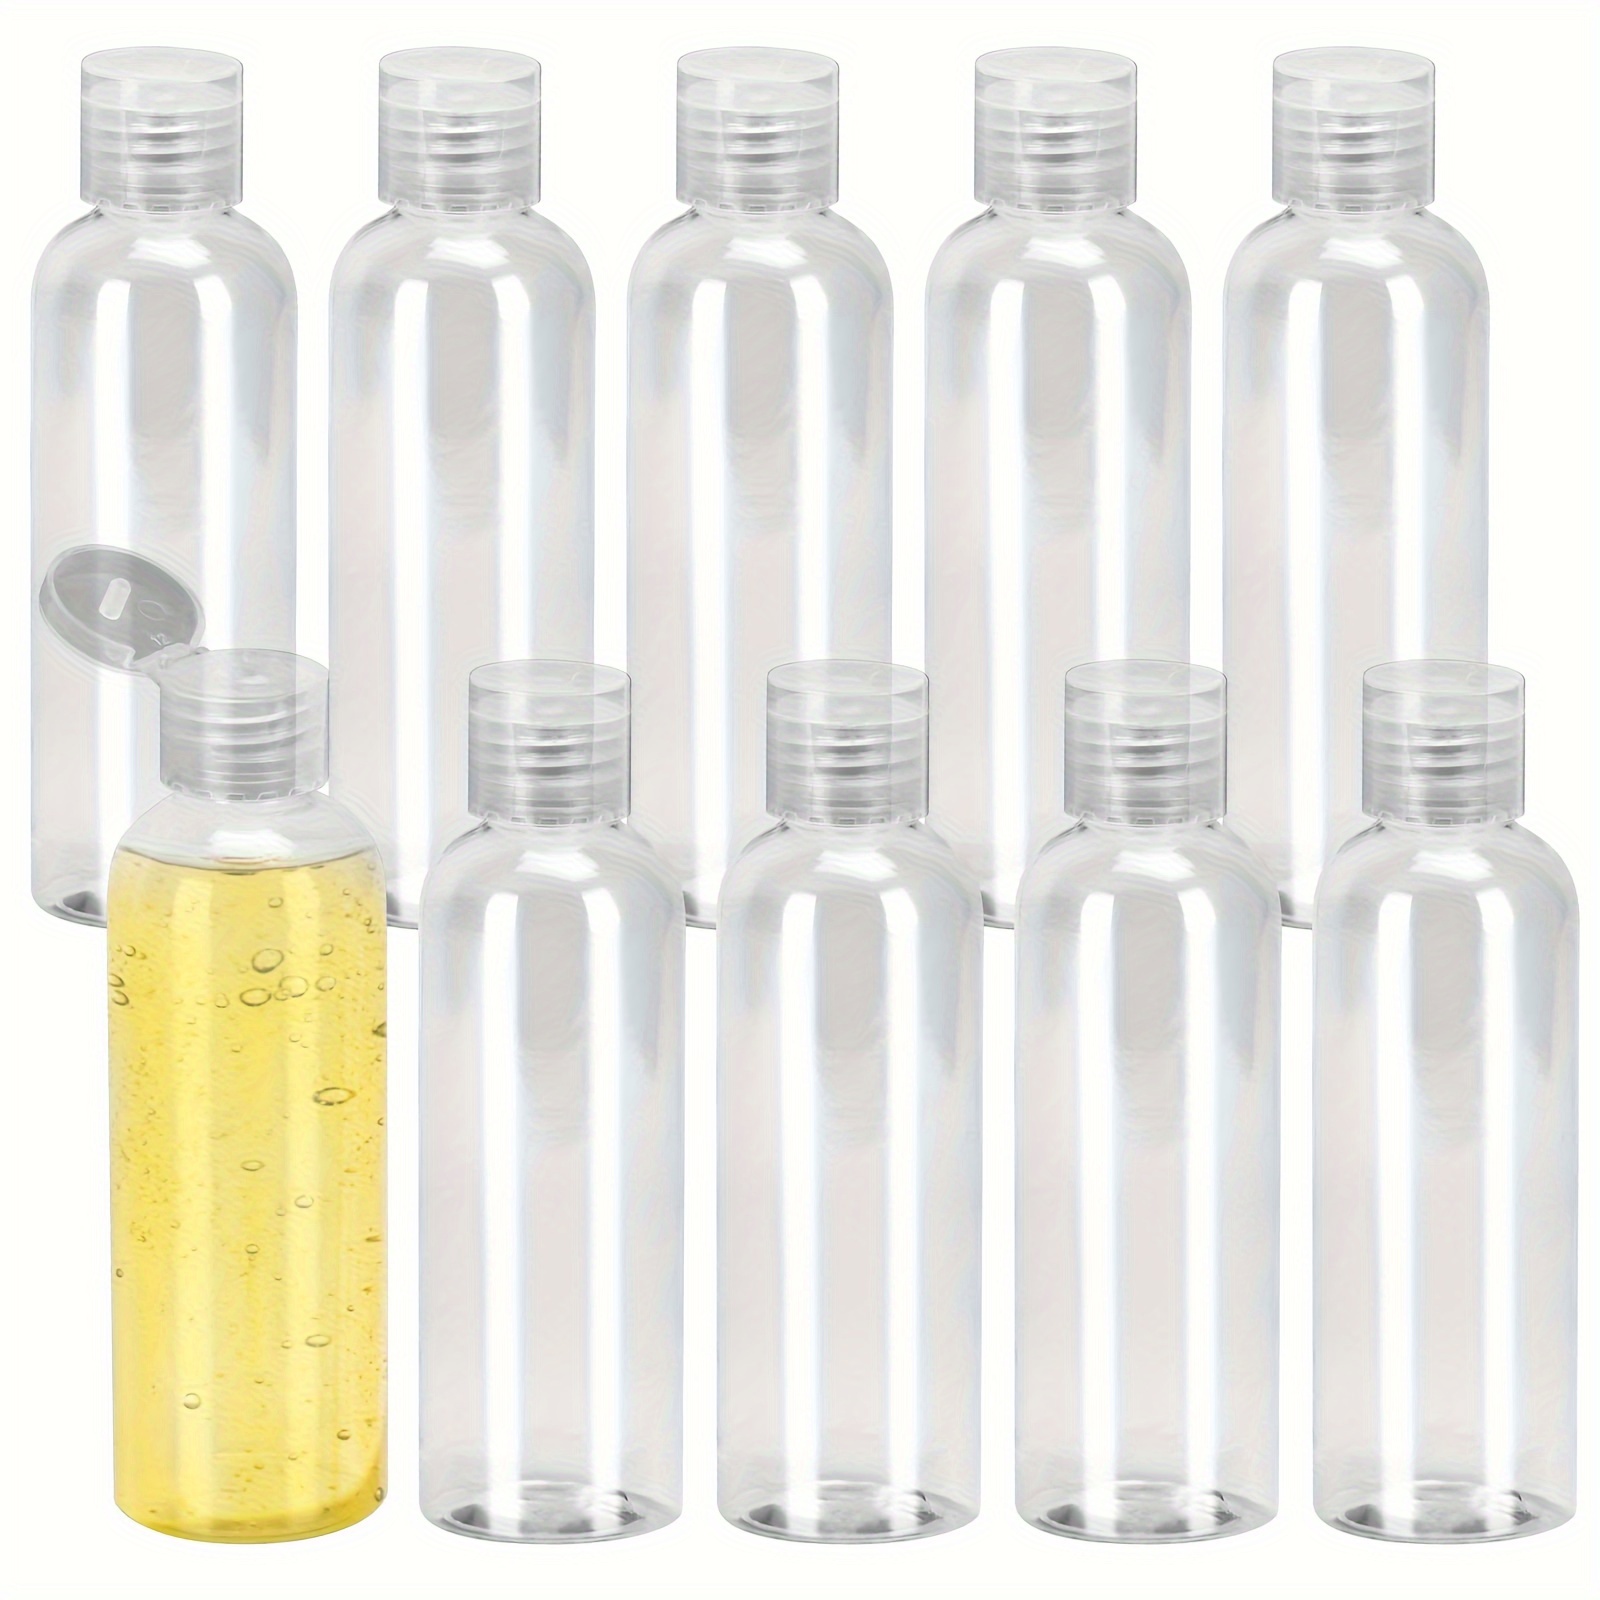 

10 Pack Flip-top Plastic Travel Bottles 100ml - Transparent Refillable Empty Squeeze Containers For Cosmetics, Liquid Shampoo, Conditioner - Leakproof, Bpa-free, Widely Used For Home, Hiking, Travel